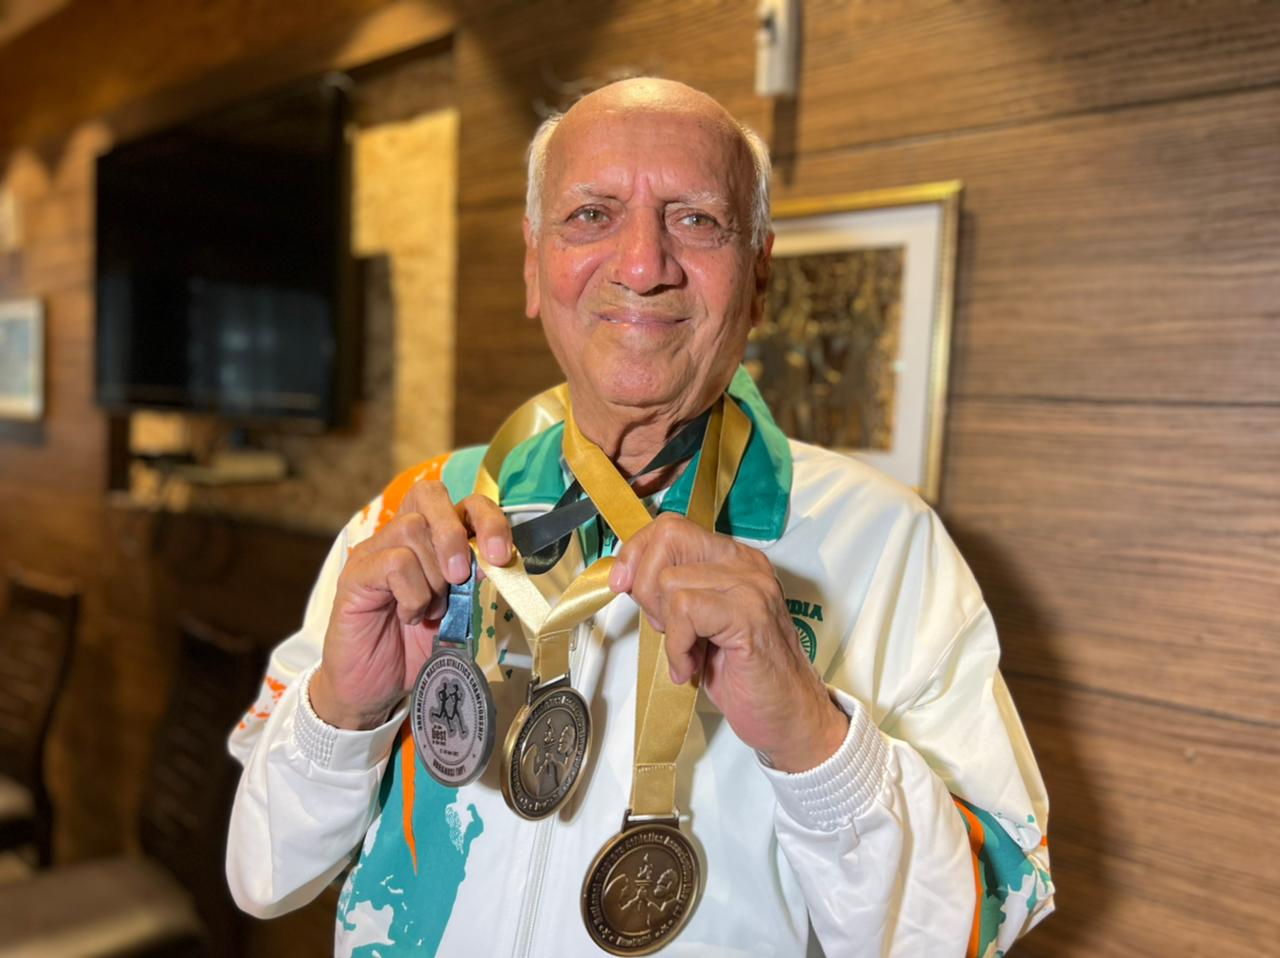 92 year old won gold medal